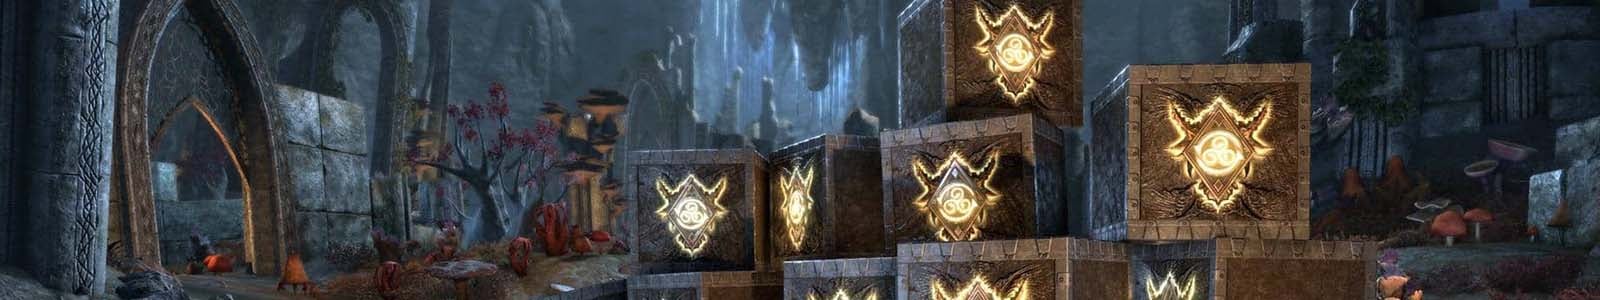 Unfeathered Crates - ESO header